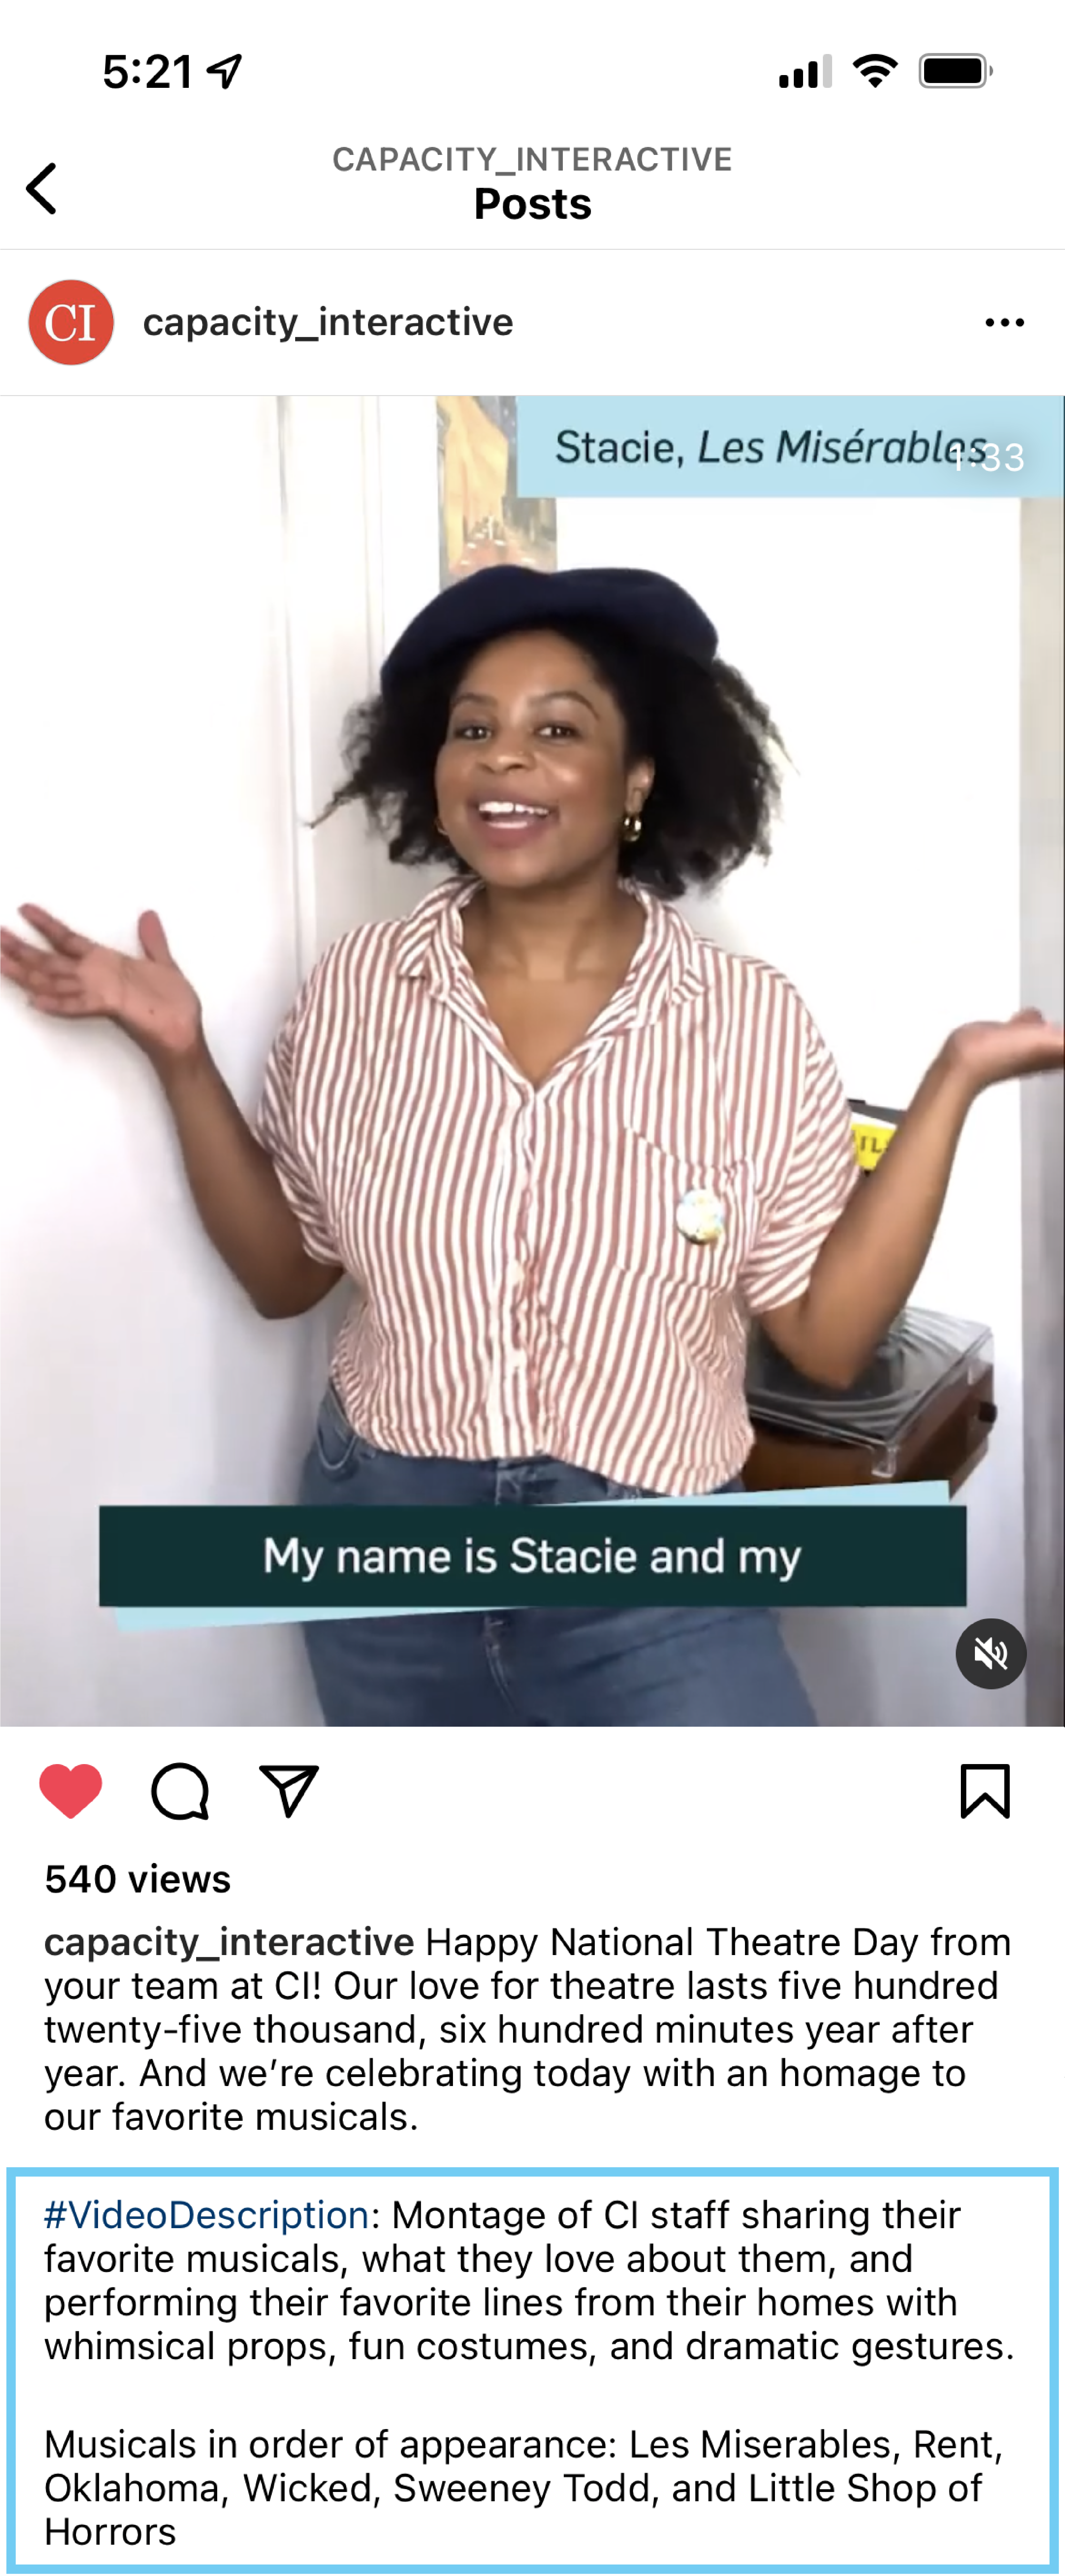 Screenshot of a video montage of CI staff sharing their favorite musicals, what they love about them, and performing their favorite lines from their homes with whimsical props, fun costumes, and dramatic gestures.